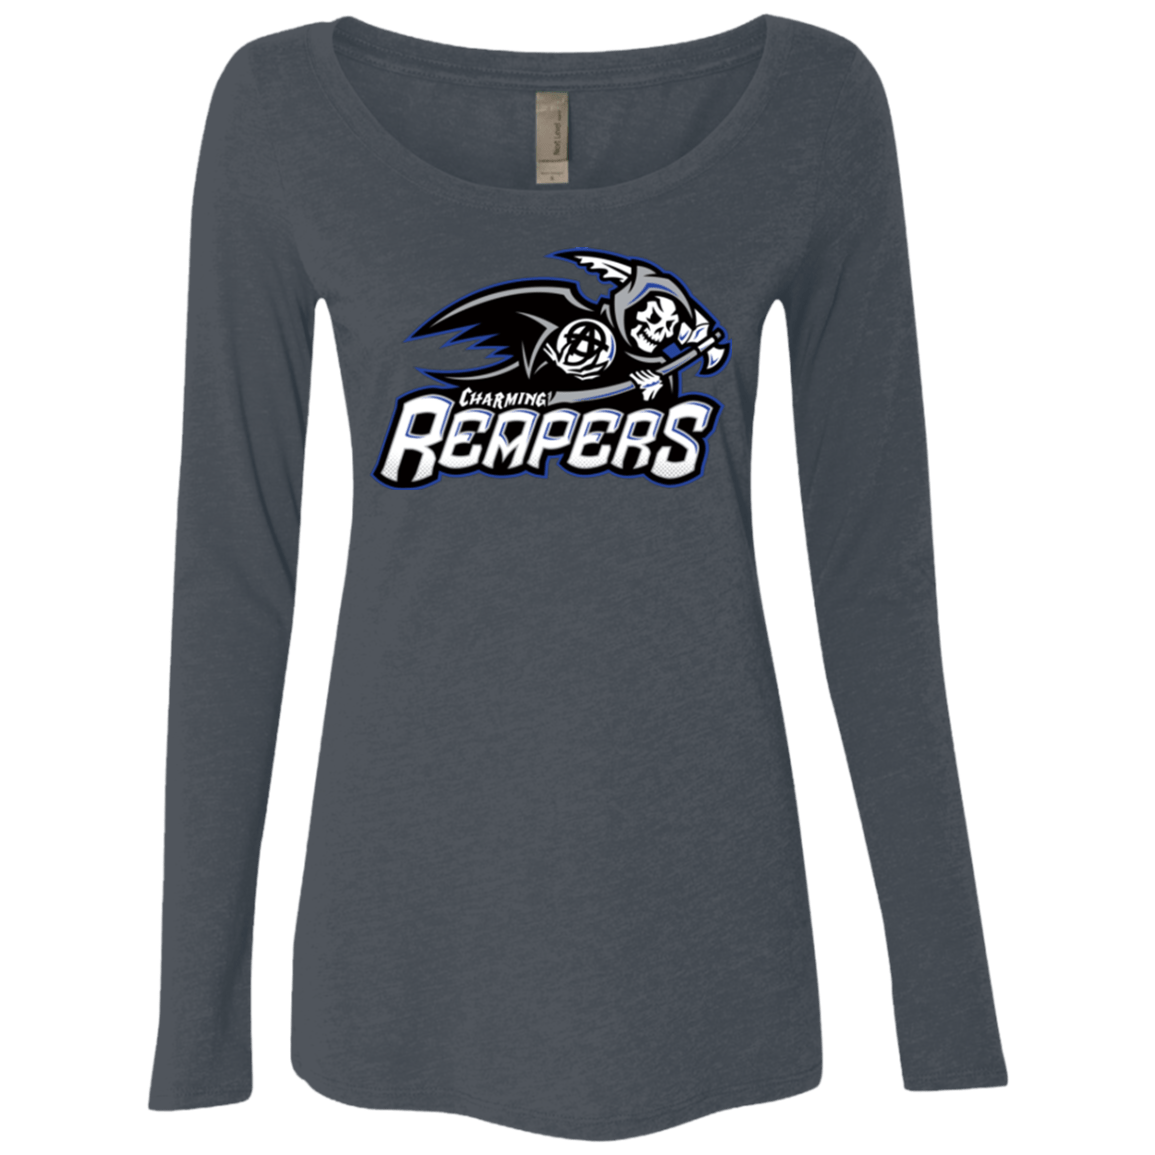 T-Shirts Vintage Navy / Small Charming Reapers Women's Triblend Long Sleeve Shirt